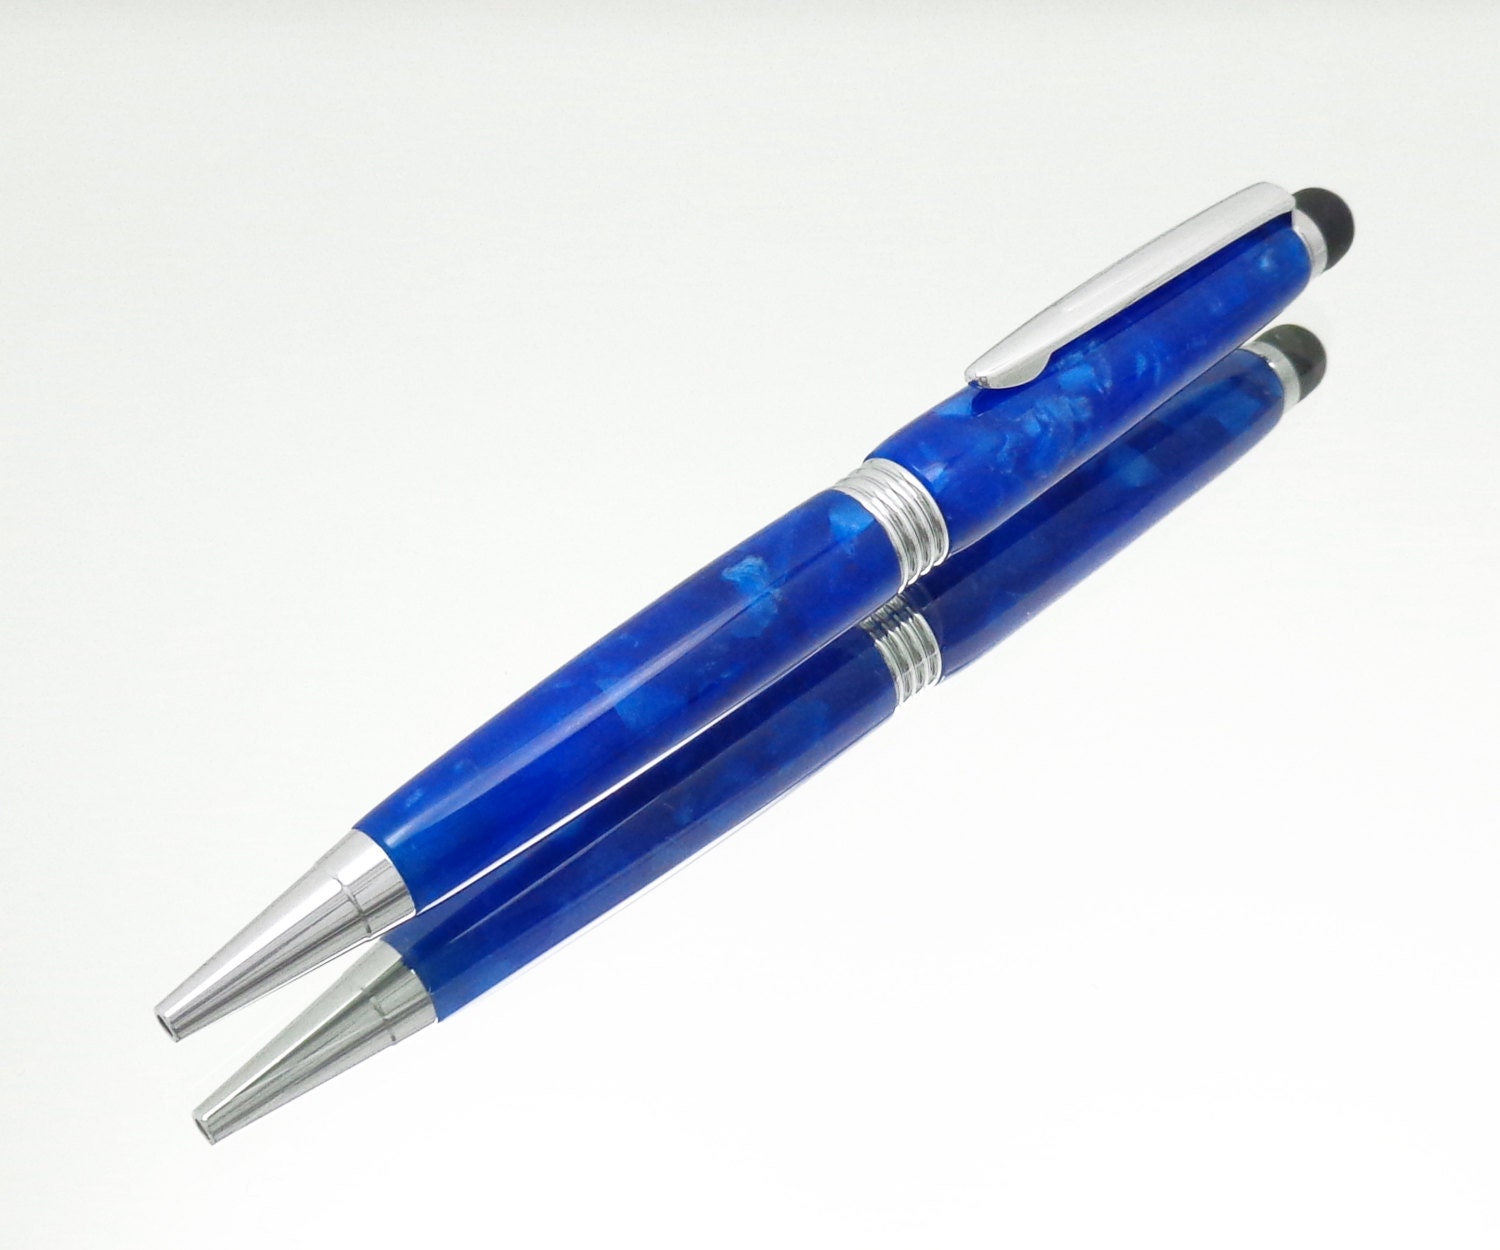 Acrylic Pen - A Writing Pen / Touch Stylus Made With Royal Blue Acrylic In Chrome Fittings - DorianCreations